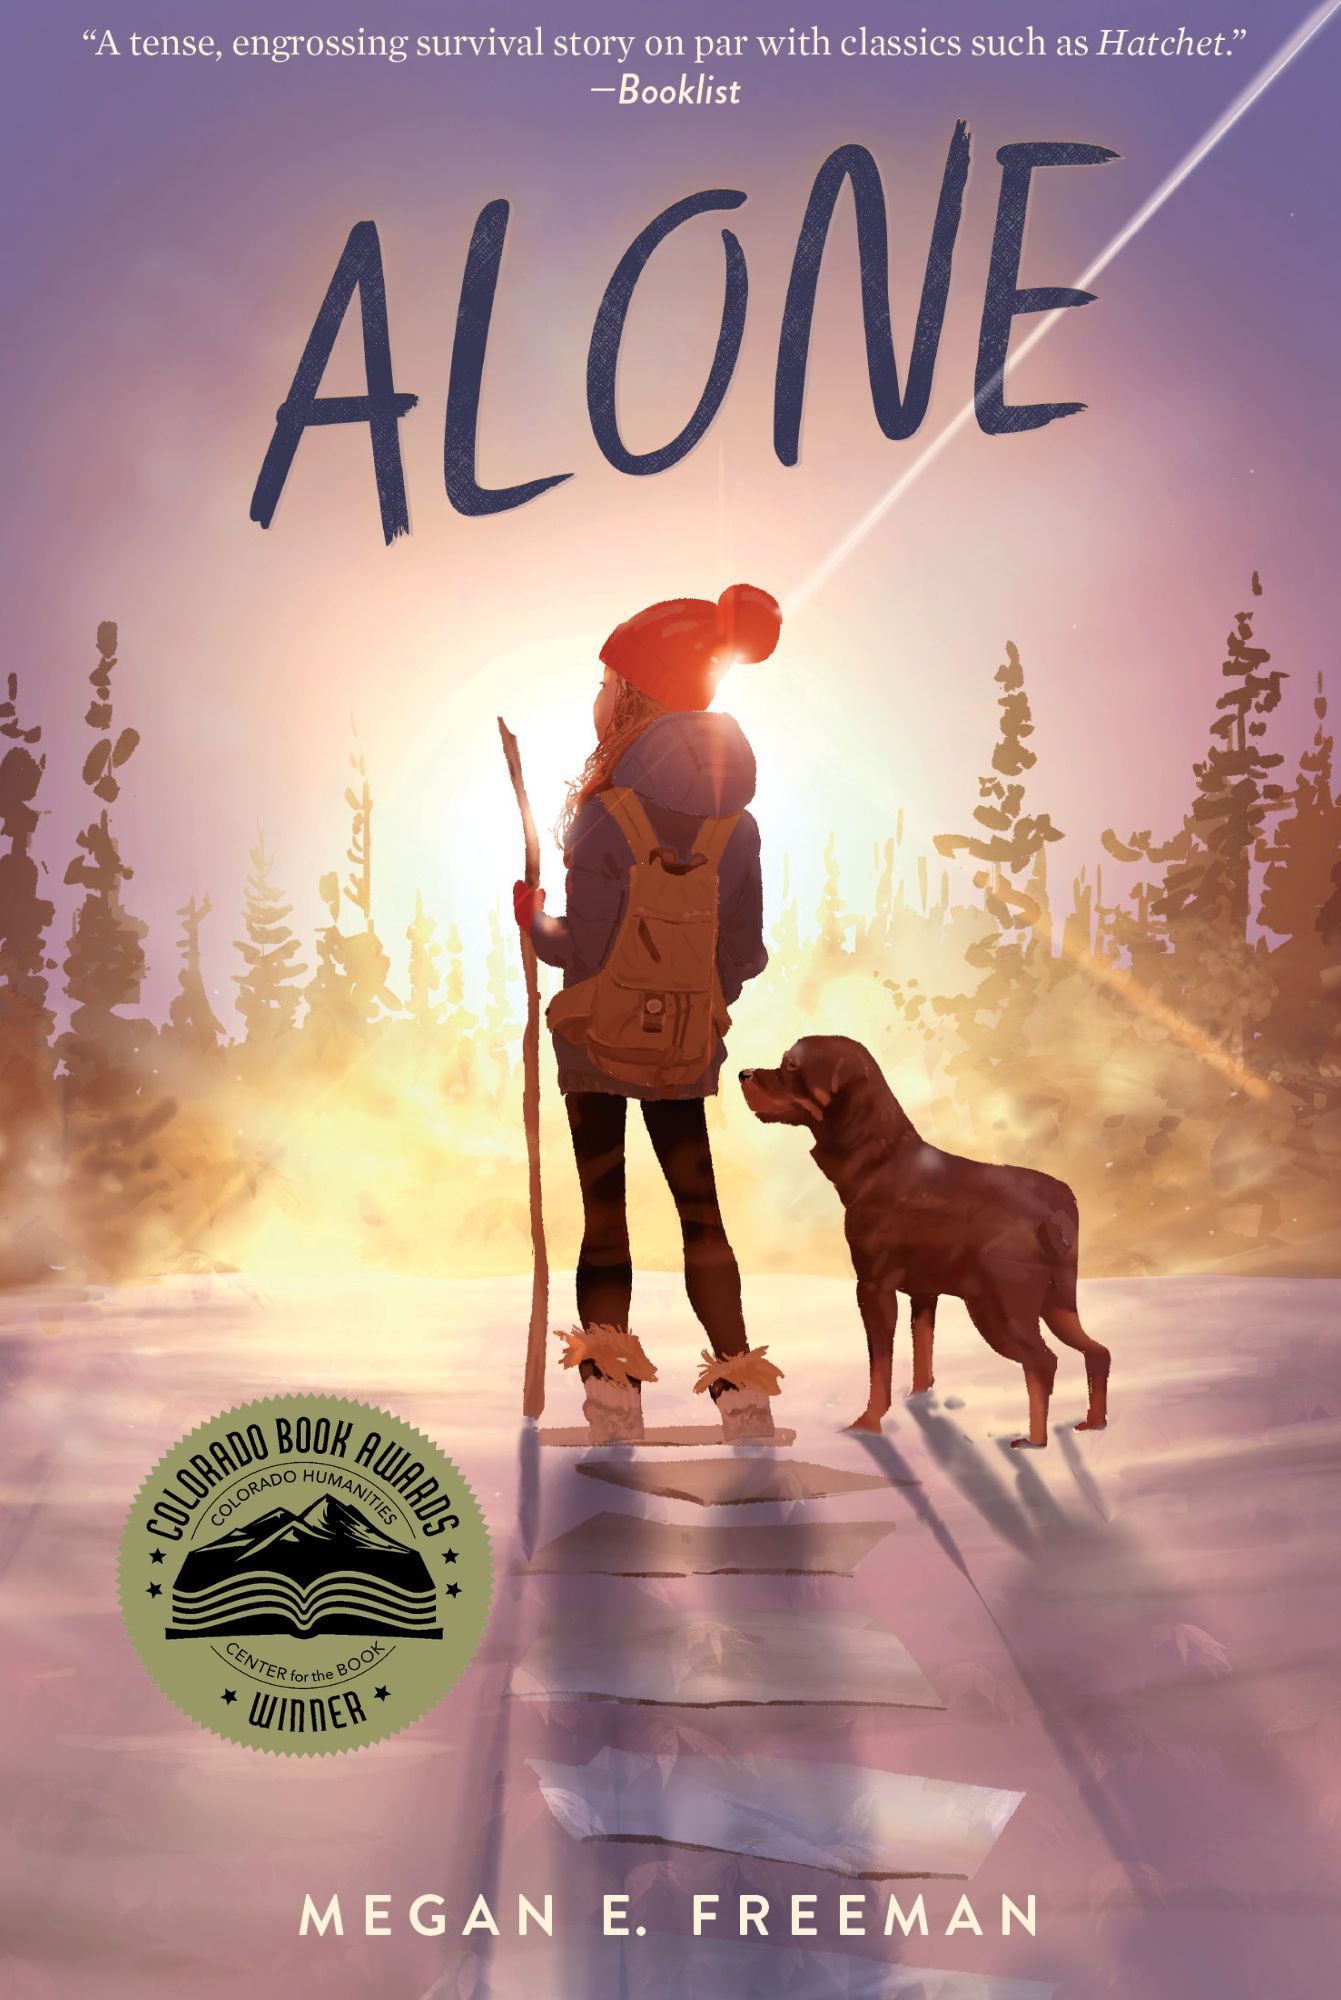 ALONE by Megan E. Freeman - cover art by Pascal Campion